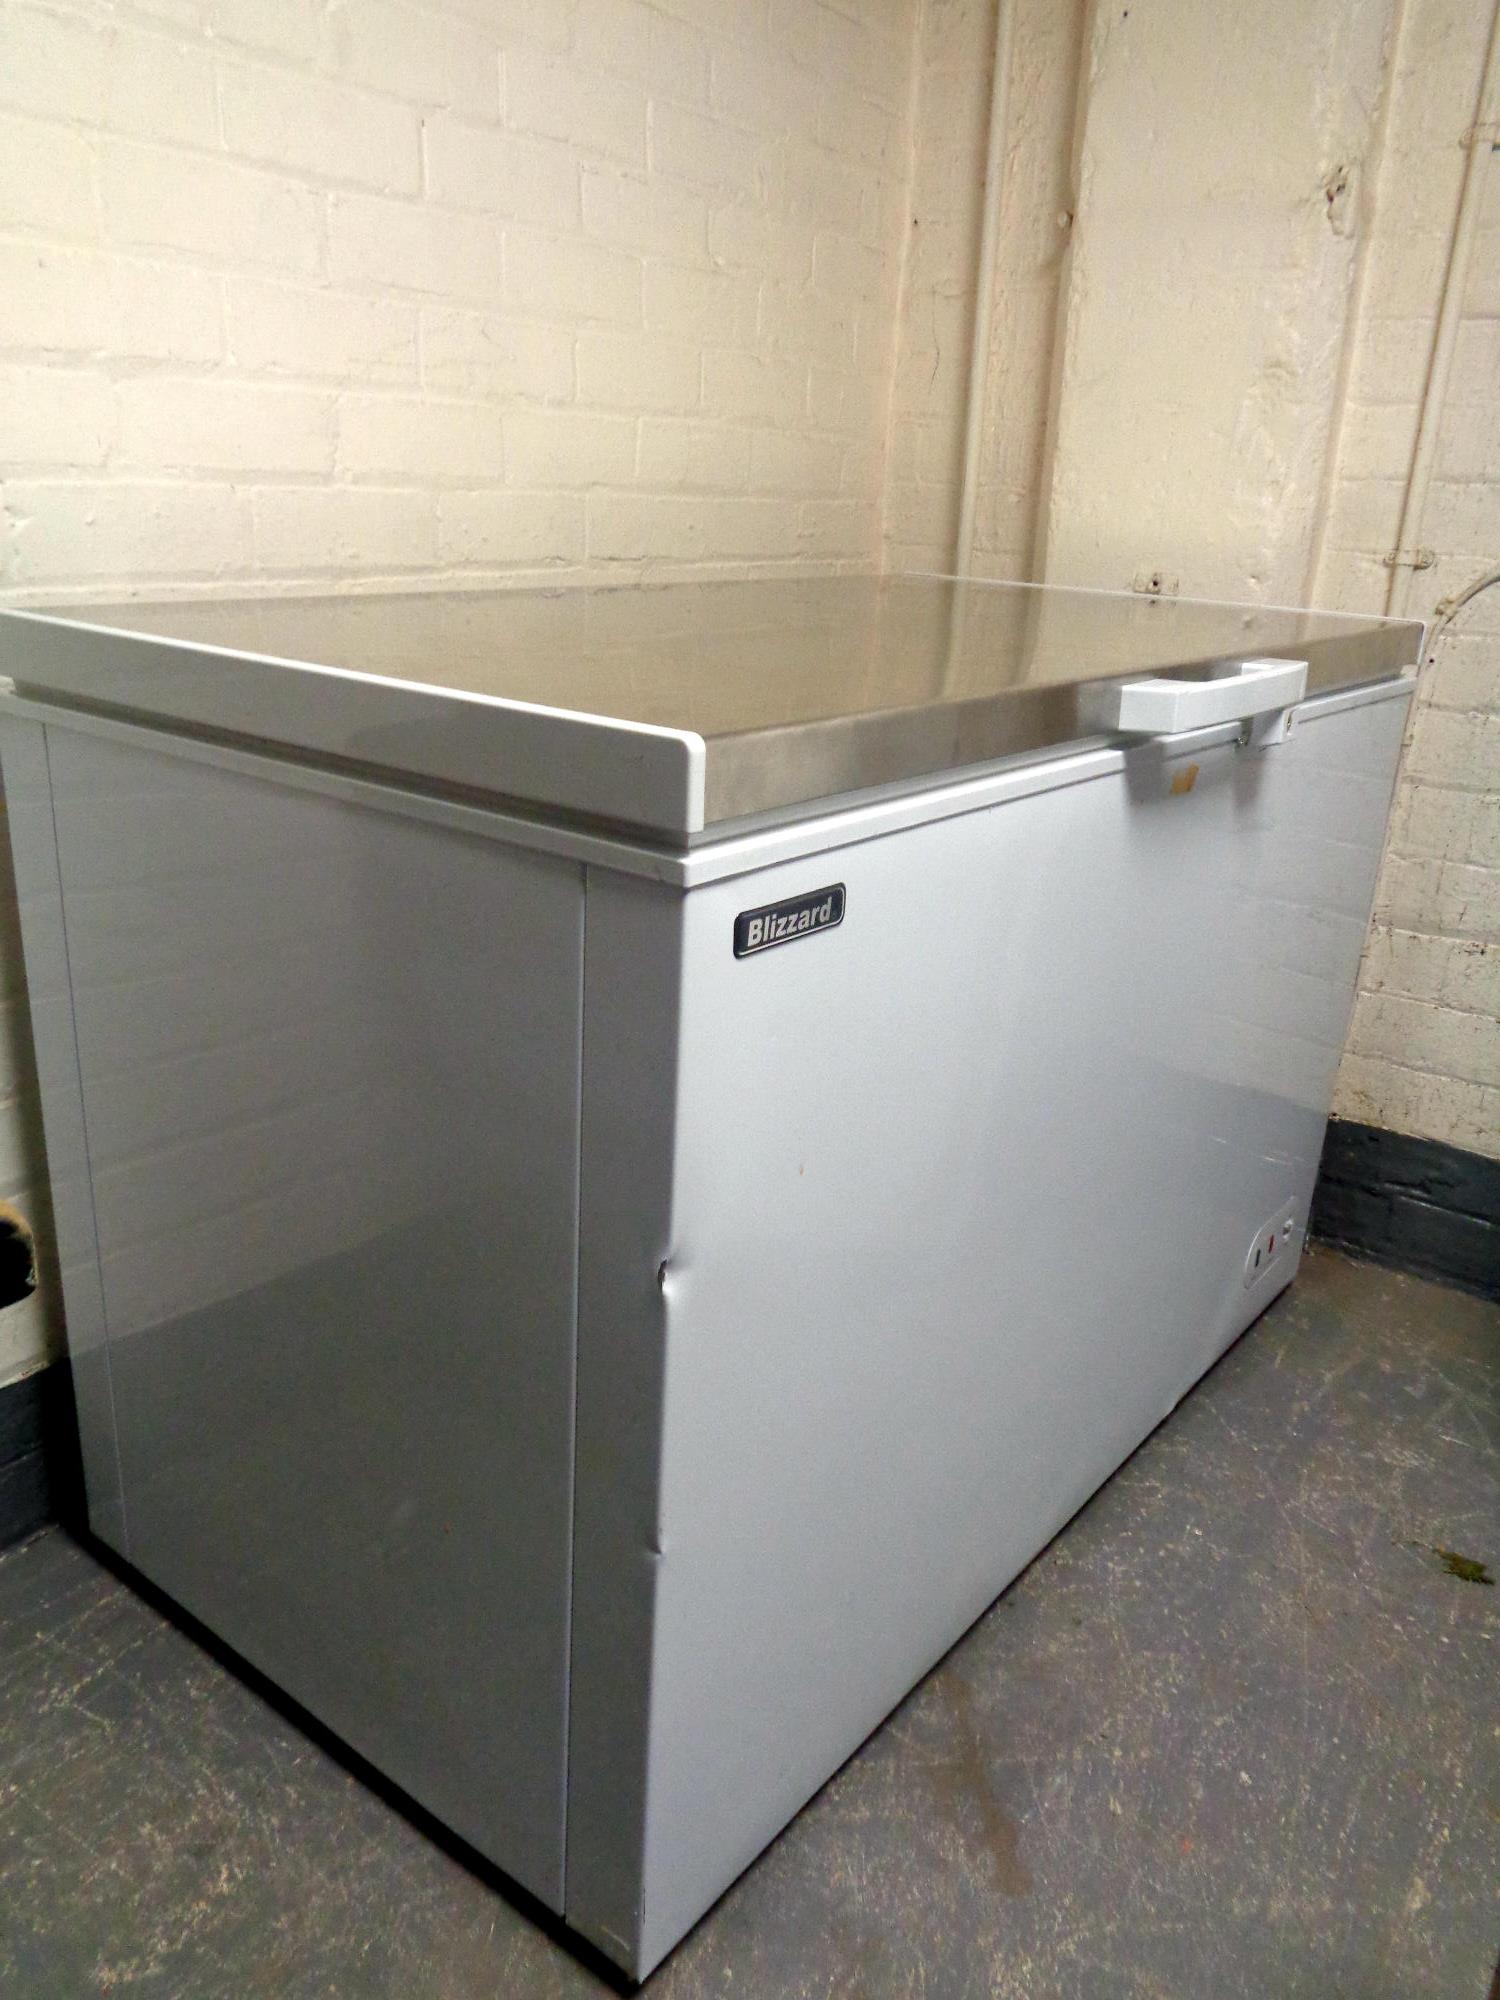 A Blizzard stainless steel topped chest freezer,